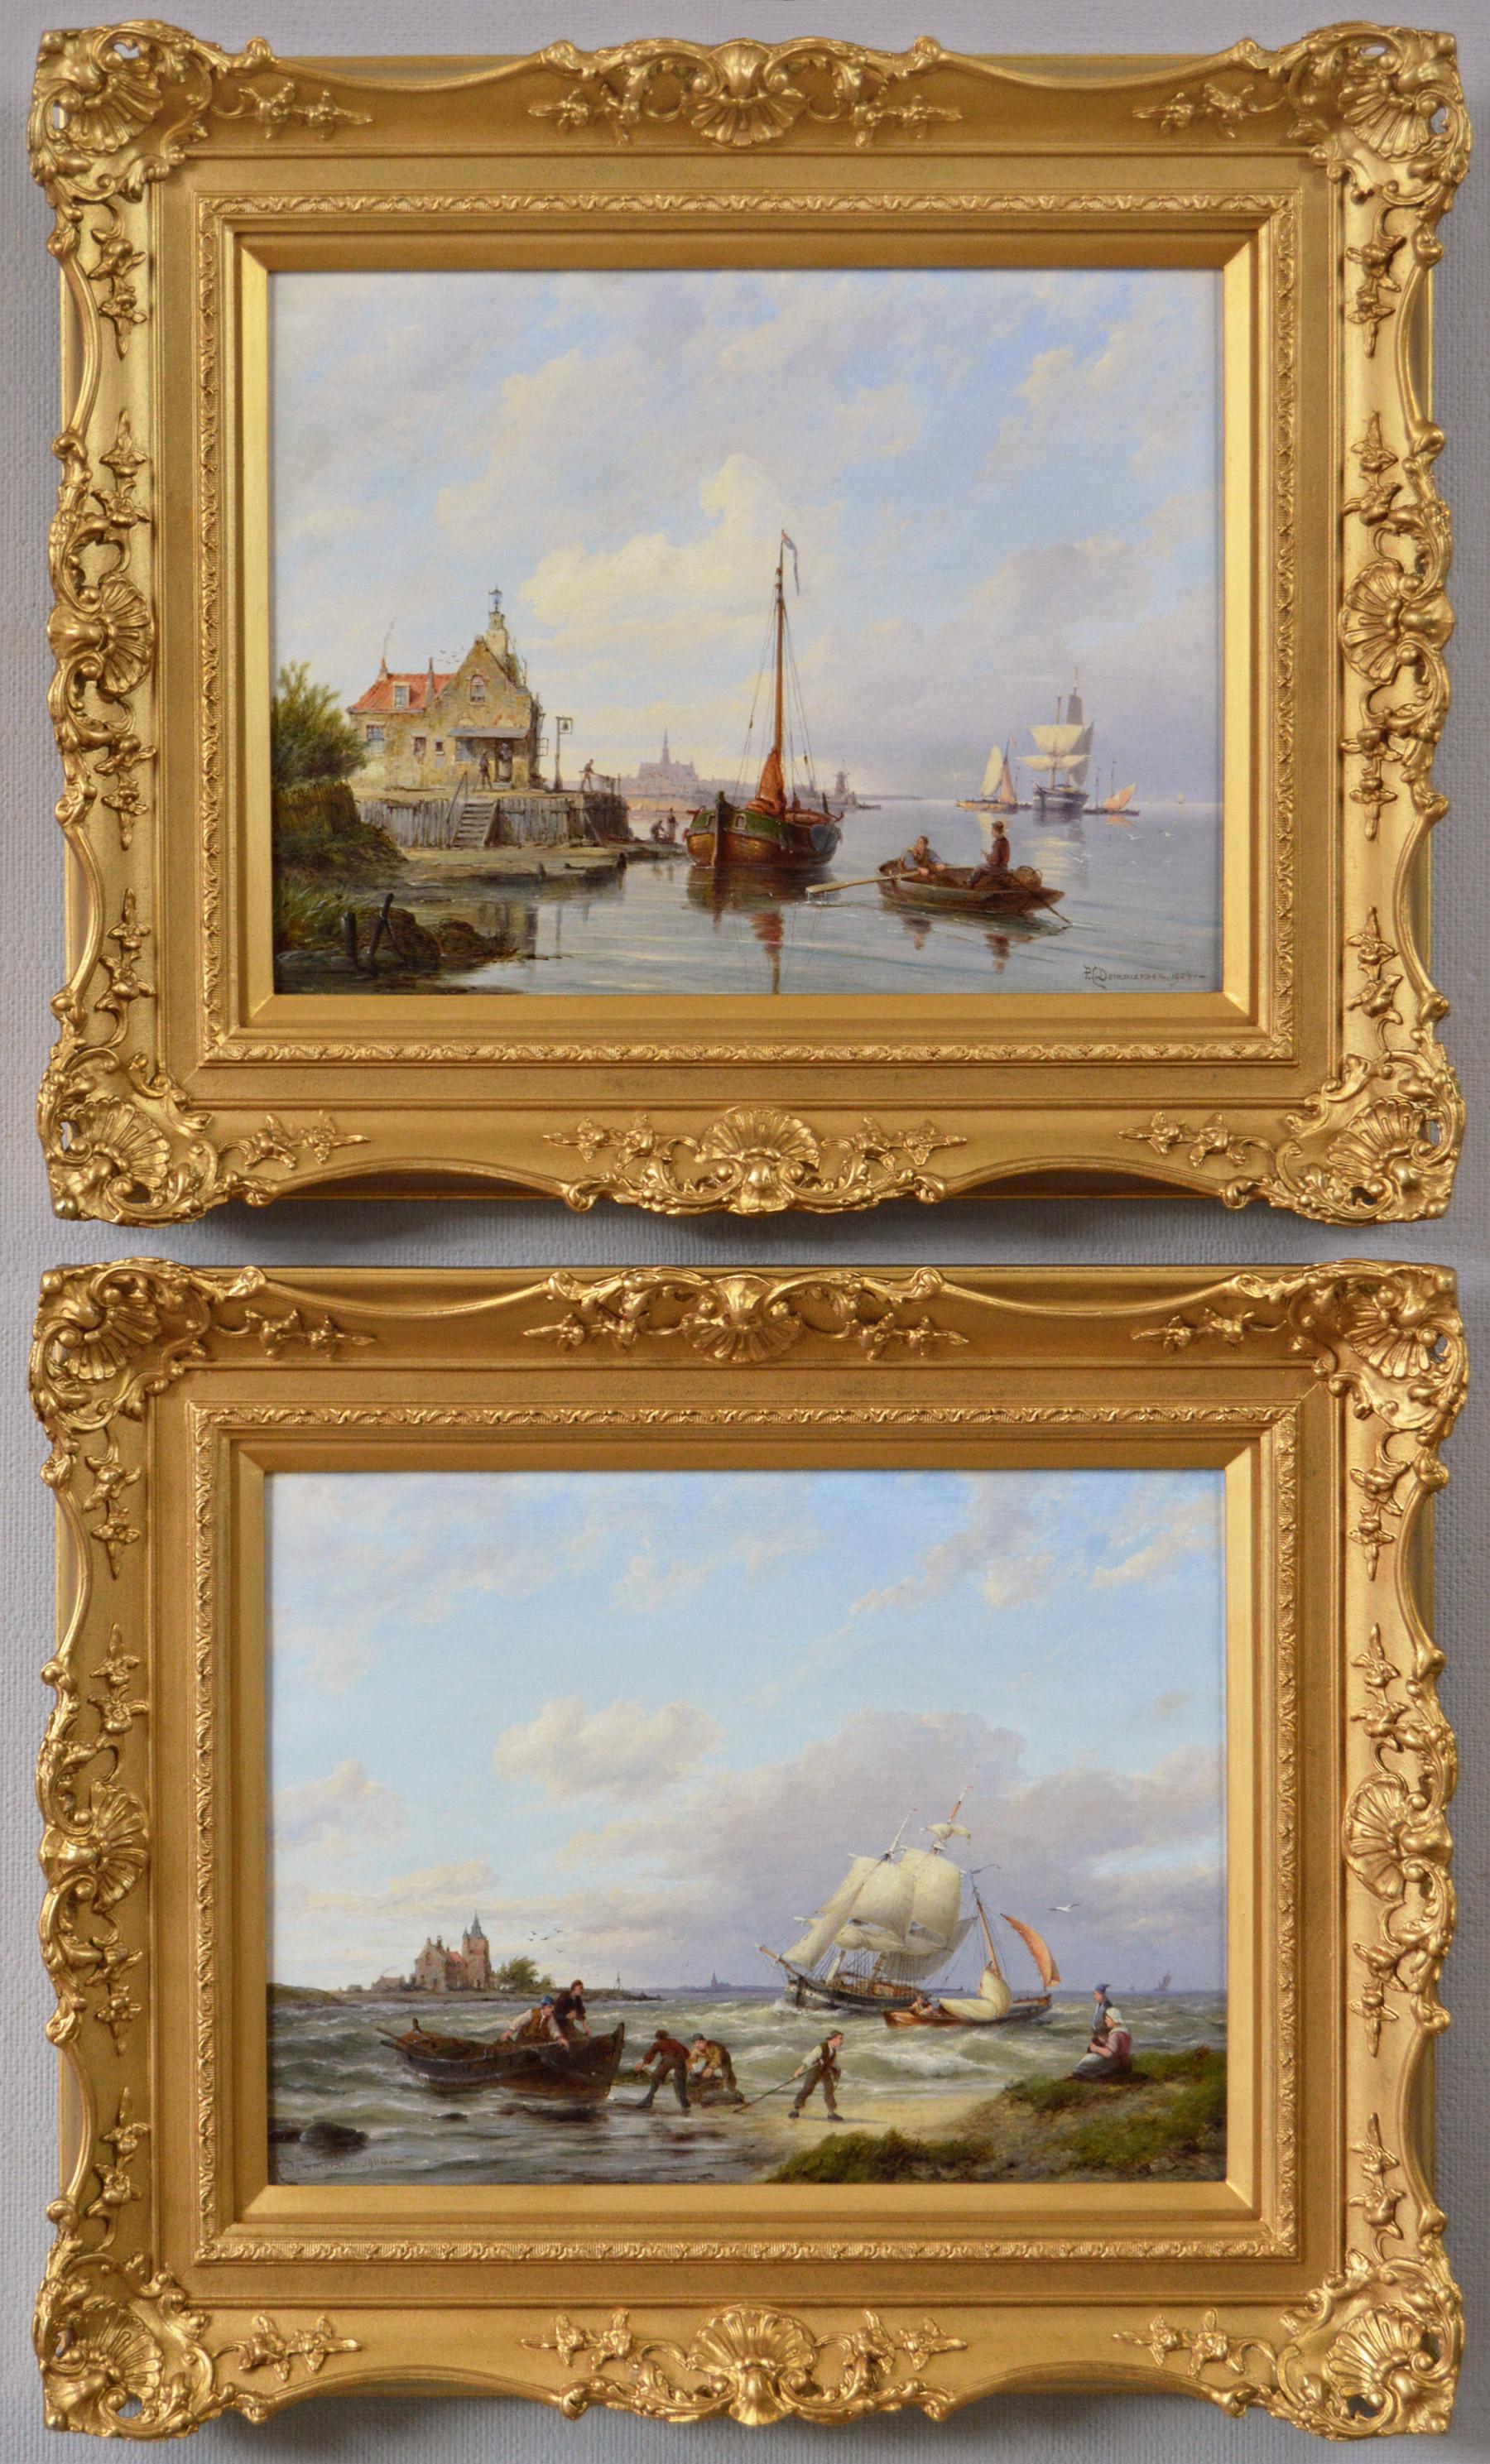 Pair of seascape oil paintings of fishing boats by a Dutch shore